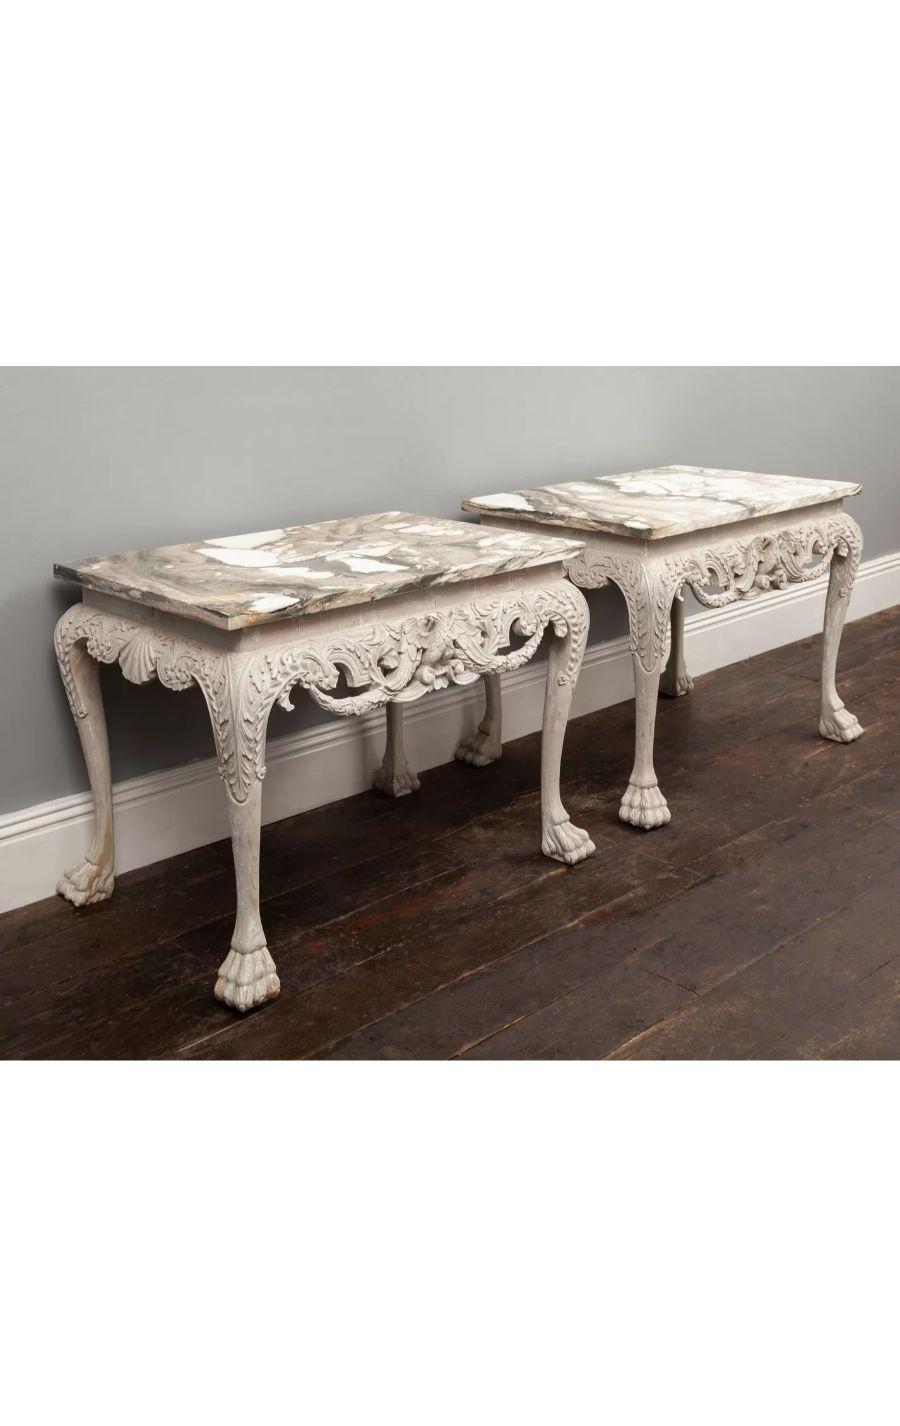 A pair of George II style painted wooden console tables with Italian Breccia marble tops.

The well carved foliate frieze with an eagle at the centre. The cabriole legs with lion paw feet.

20th century 

Additional